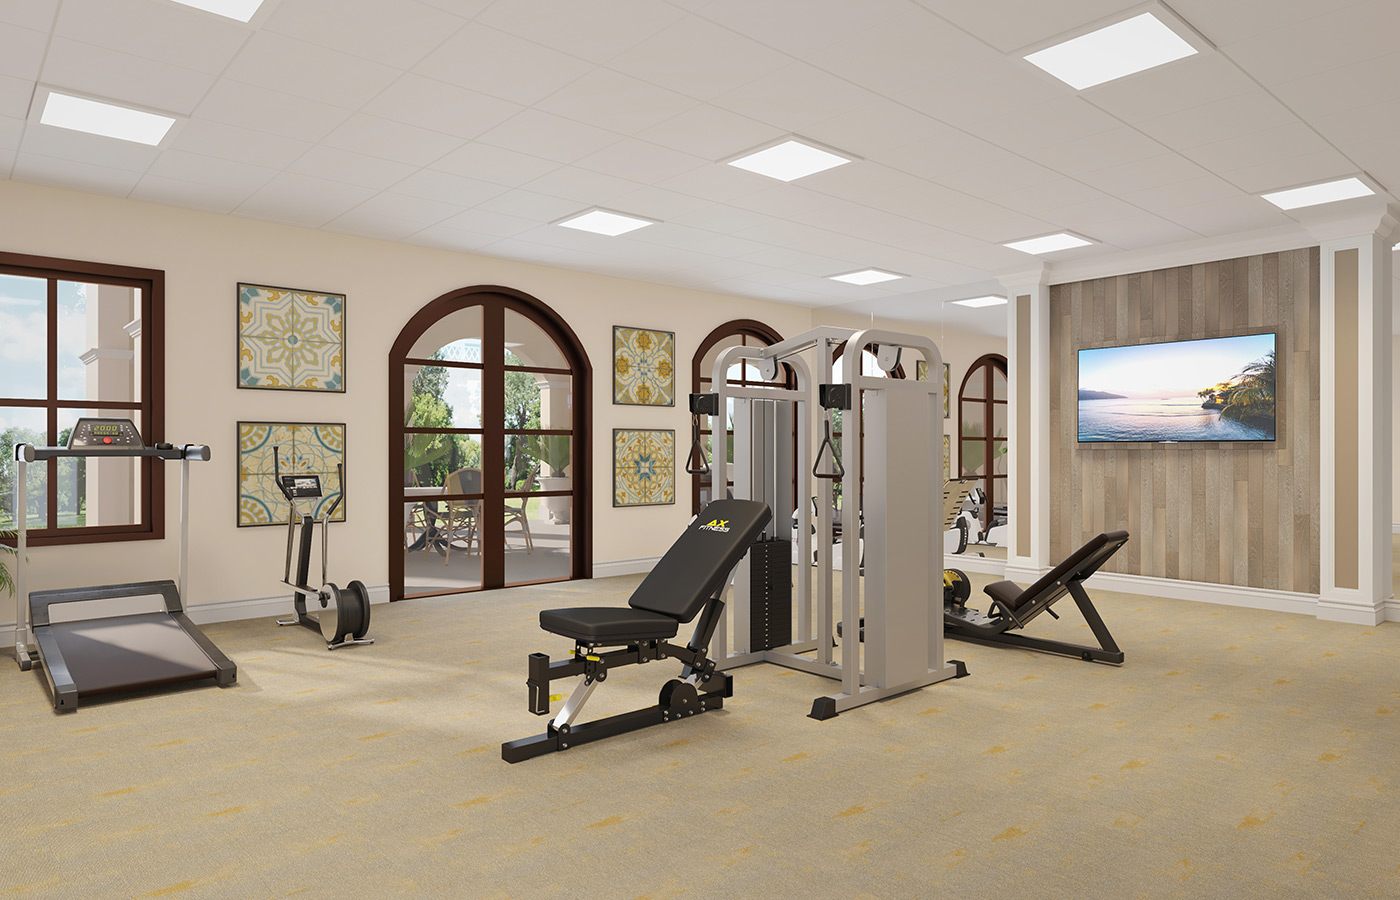 A fitness center with equipment.